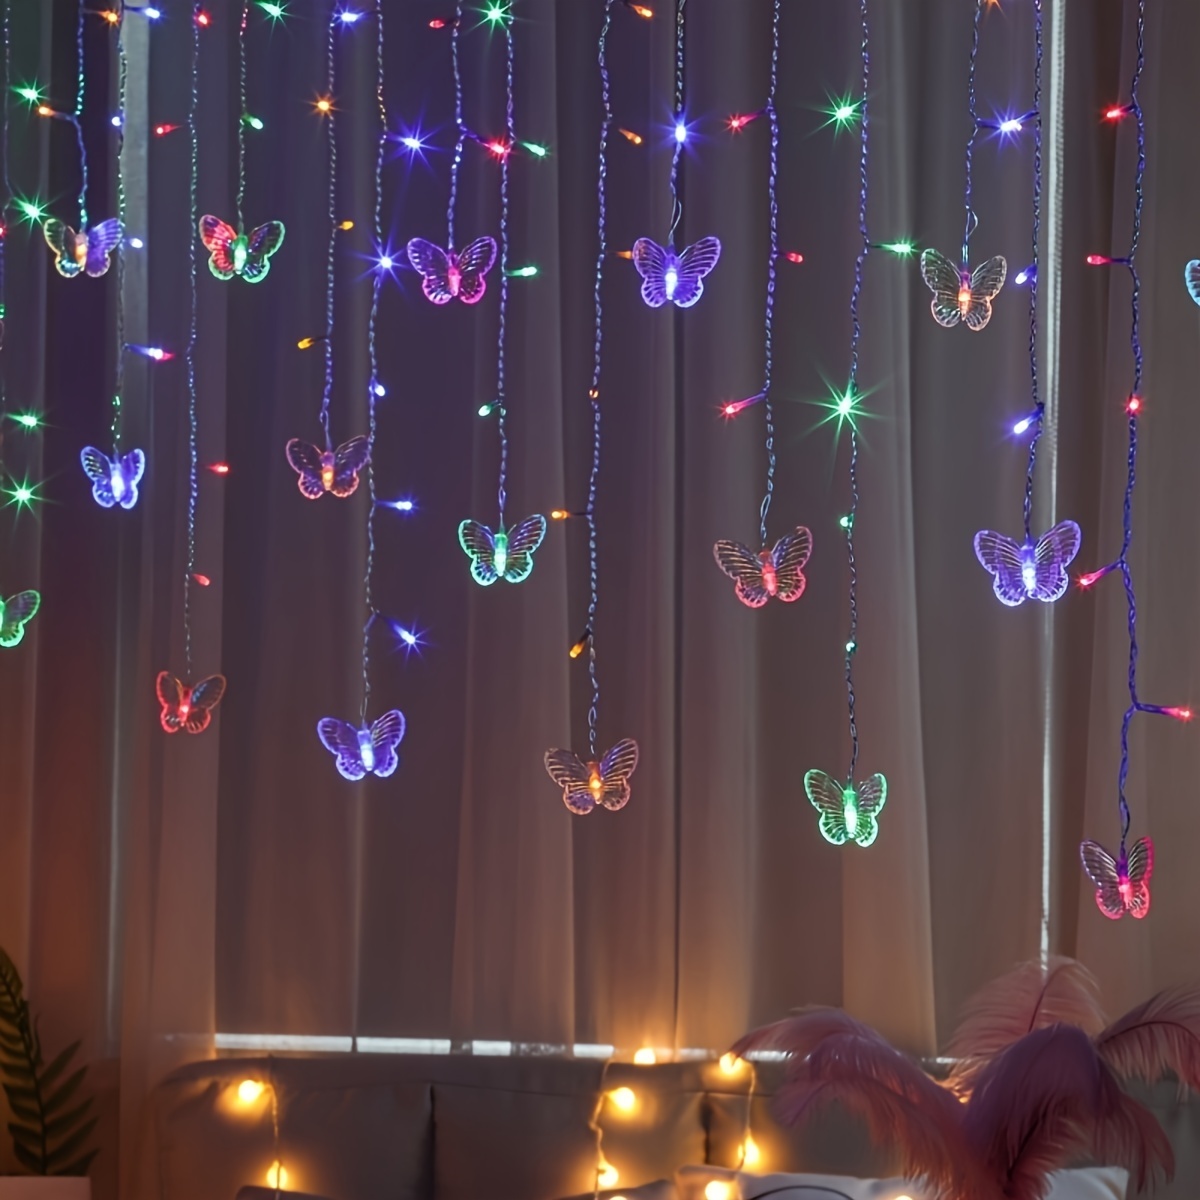 1pc butterfly curtain fairy light 8 modes 2m 6 56ft 48 led solar firefly twinkle string lights 10 butterflies waterproof copper wire light for room bedroom christmas wedding party dorm patio details 0